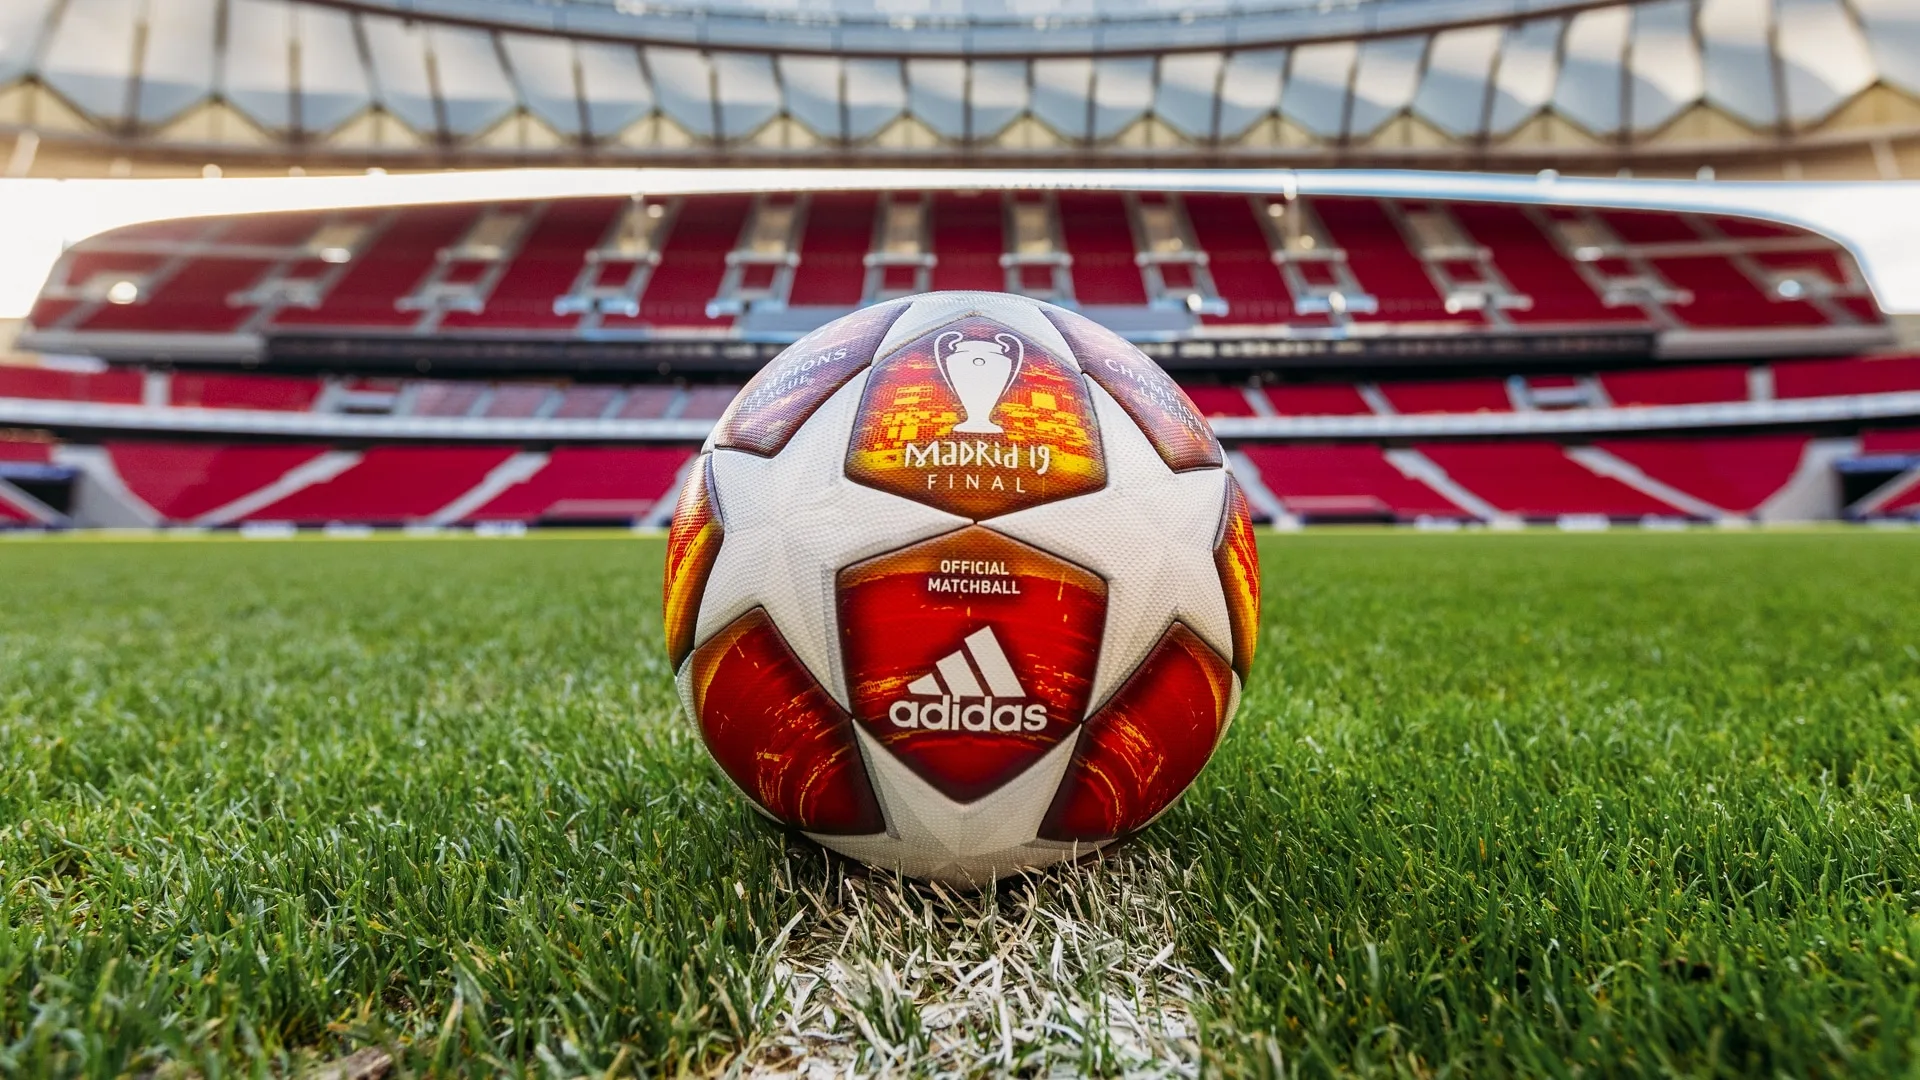 Review: adidas Finale 18 Official Match Ball